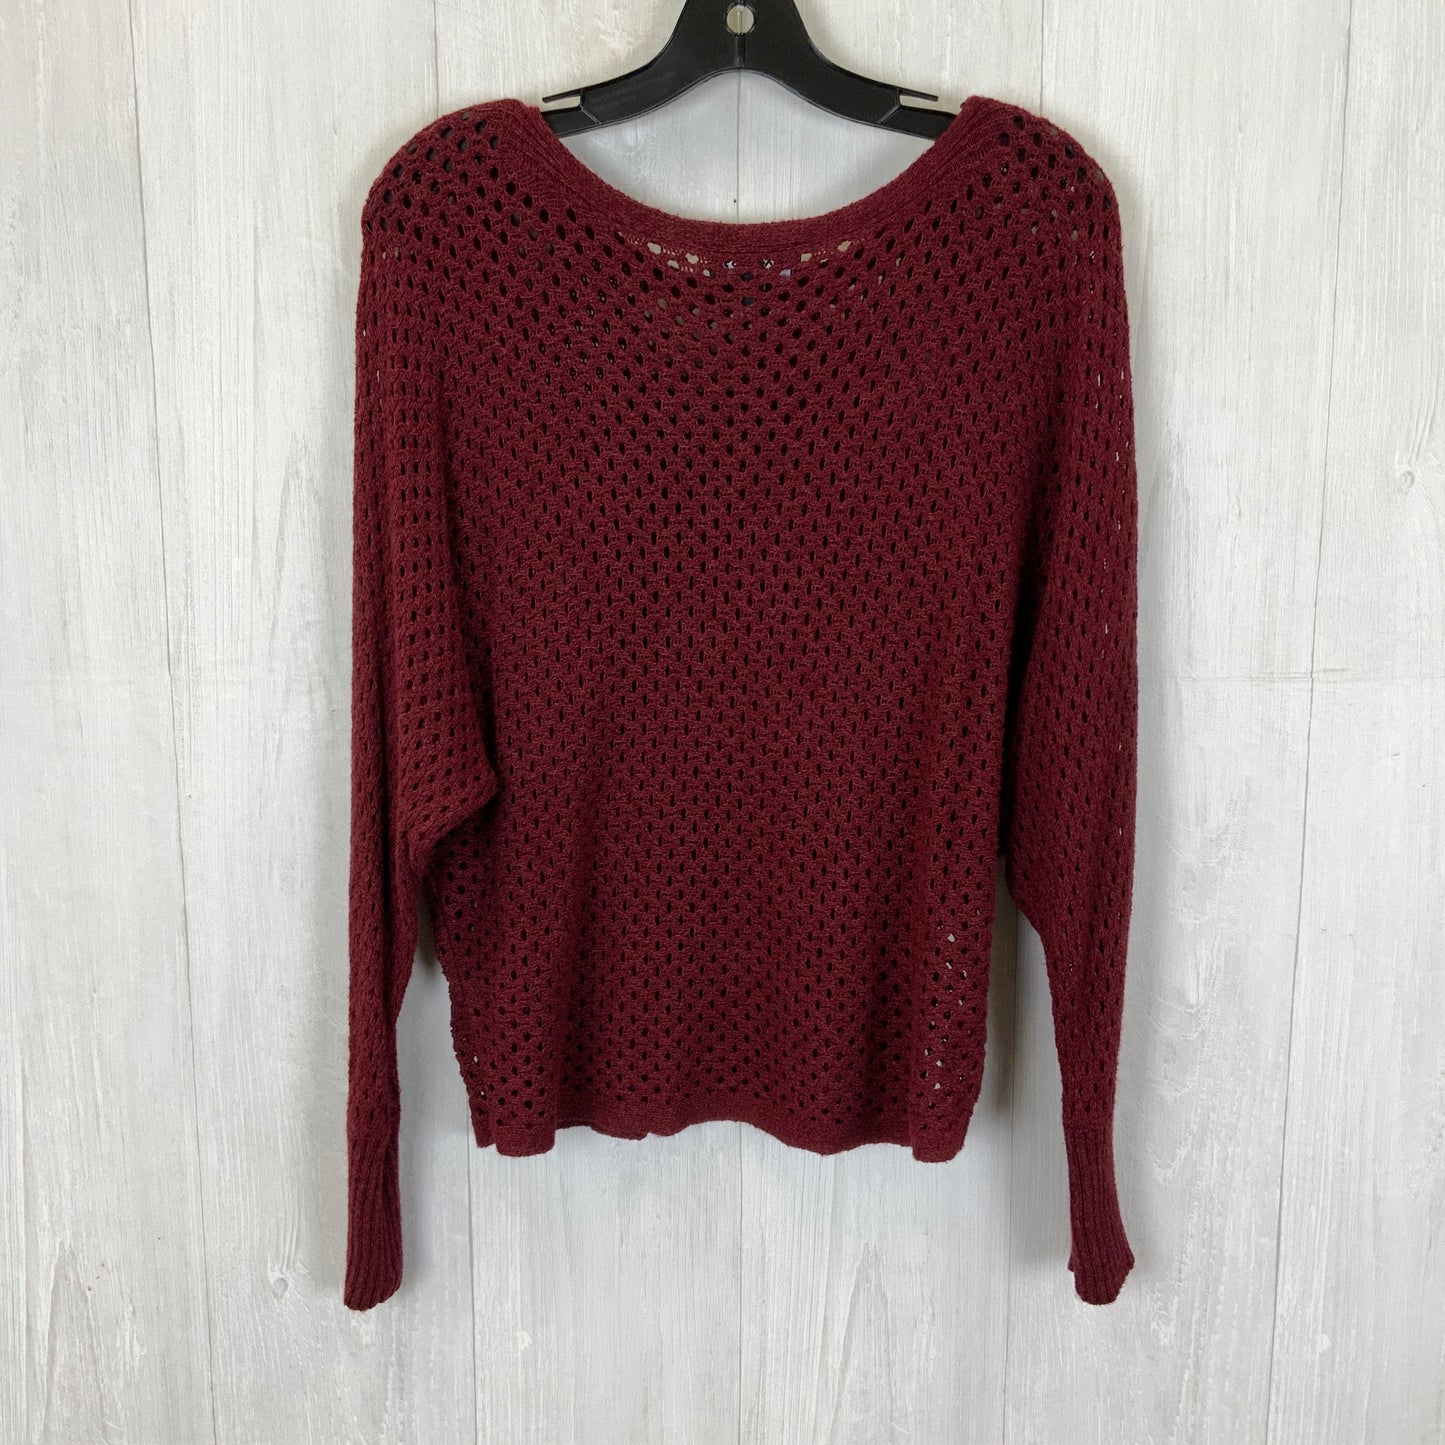 Maroon Sweater Express, Size M